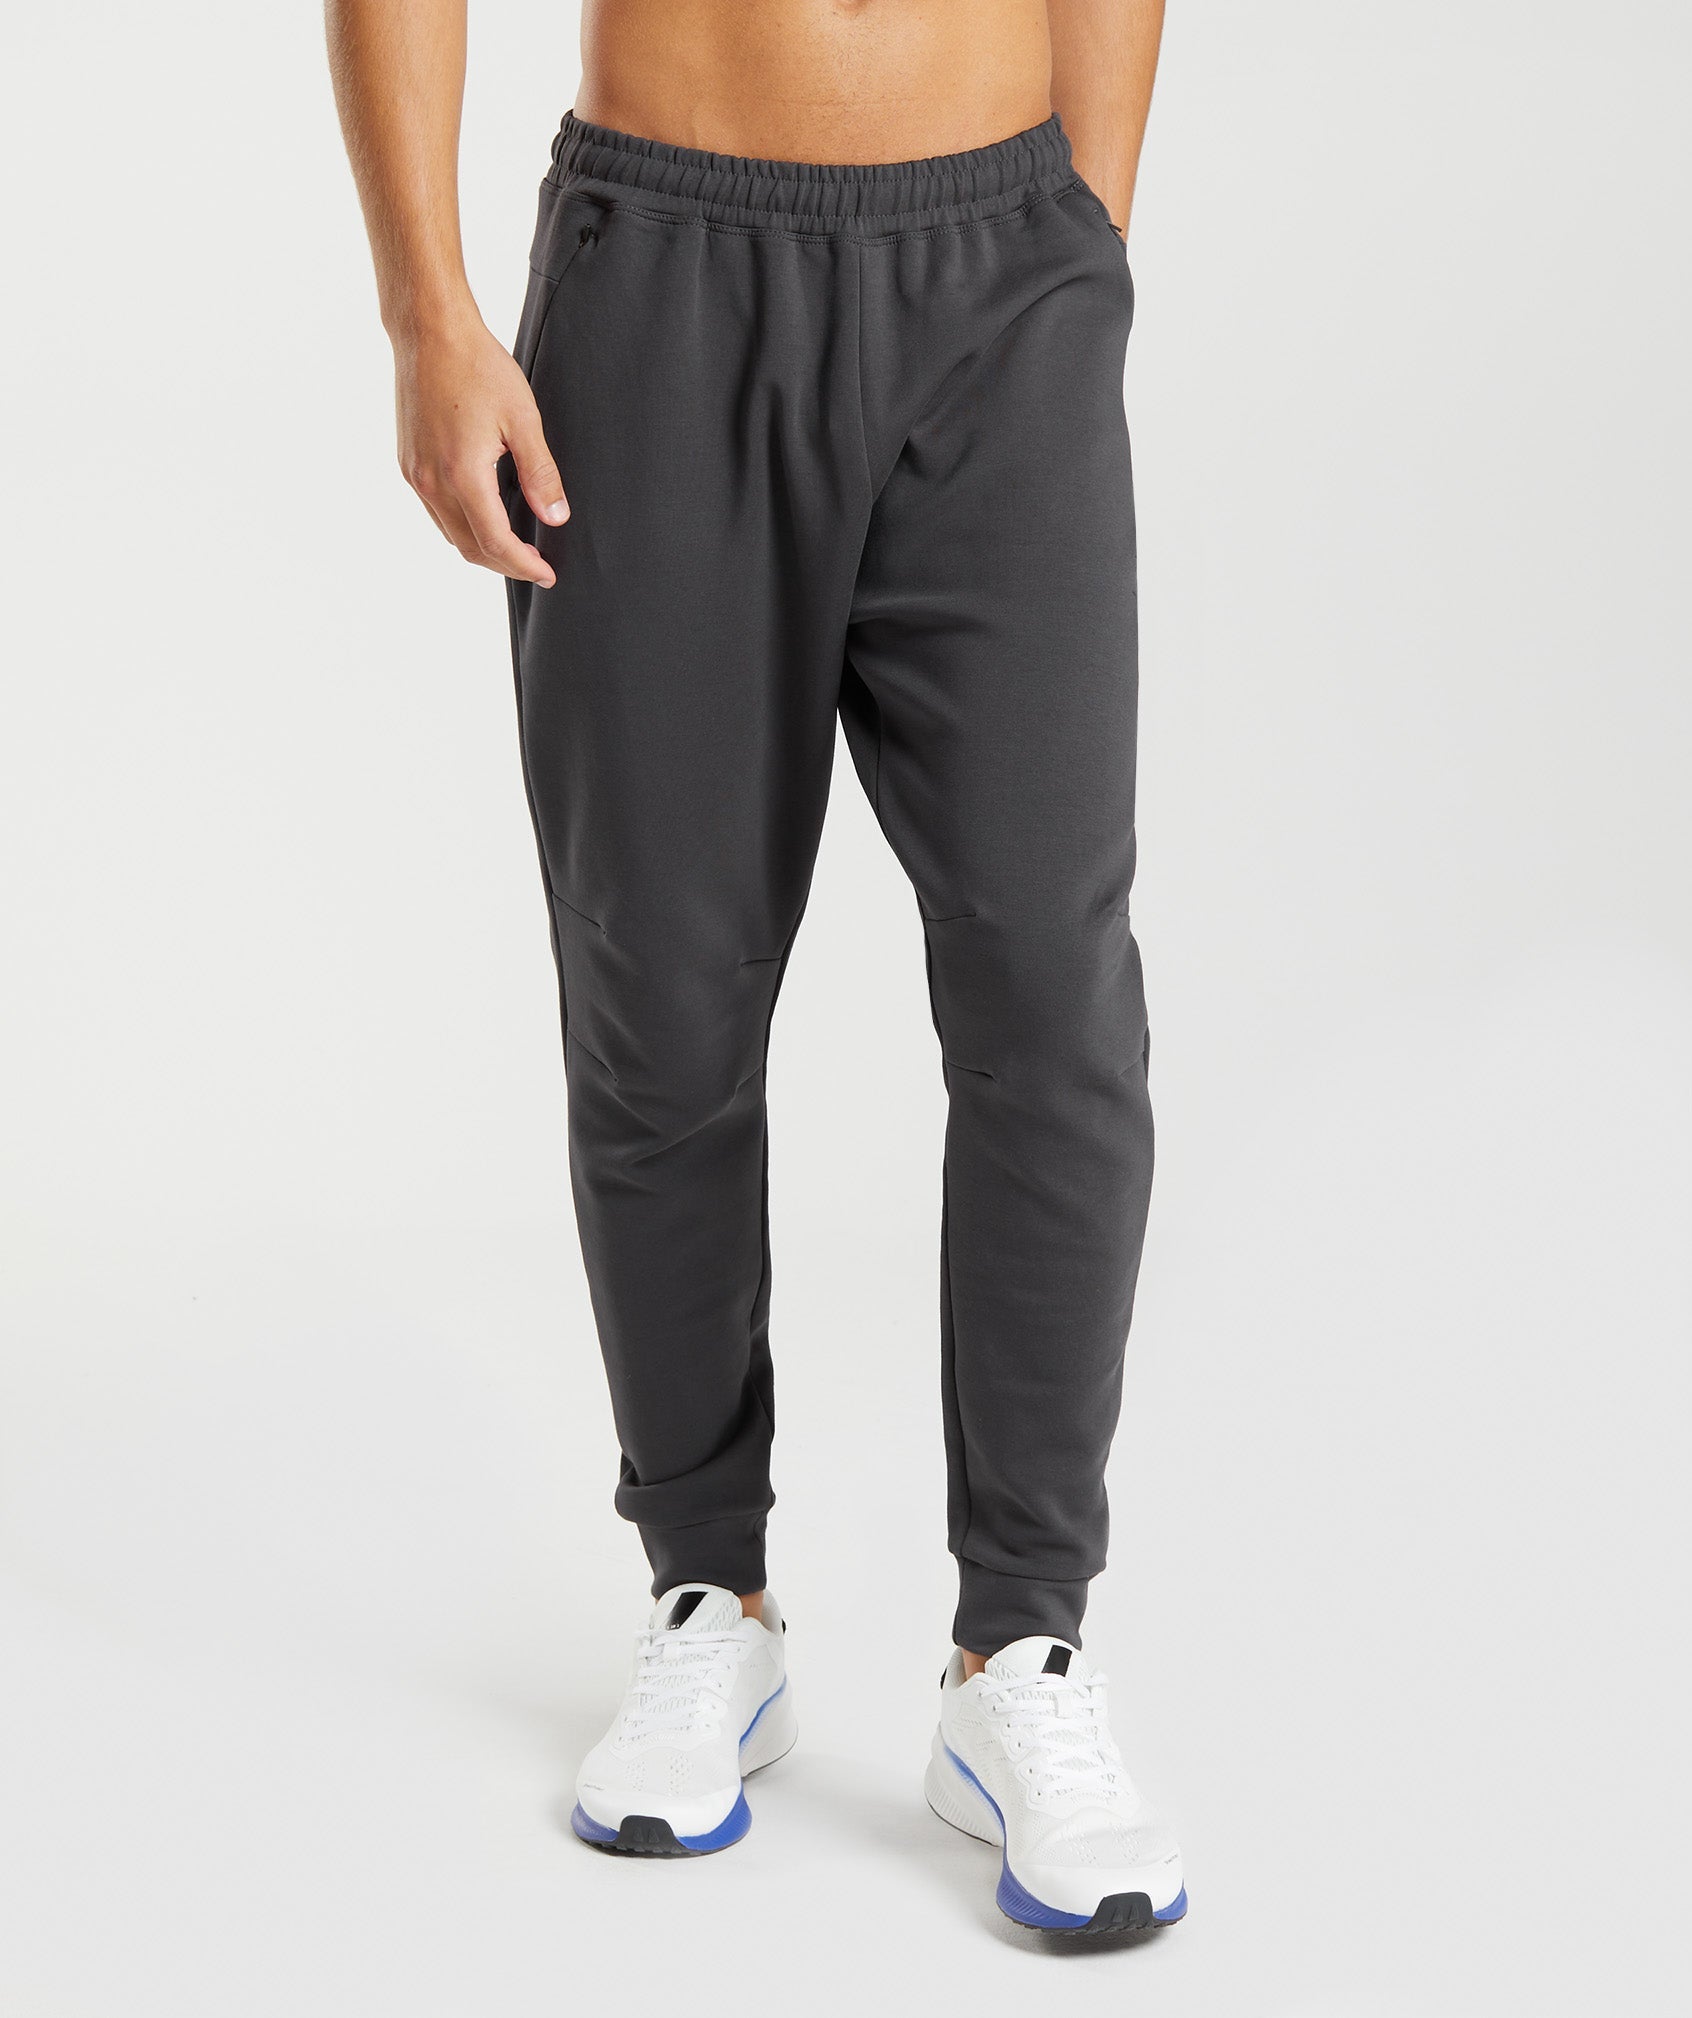 Rest Day Knit Joggers